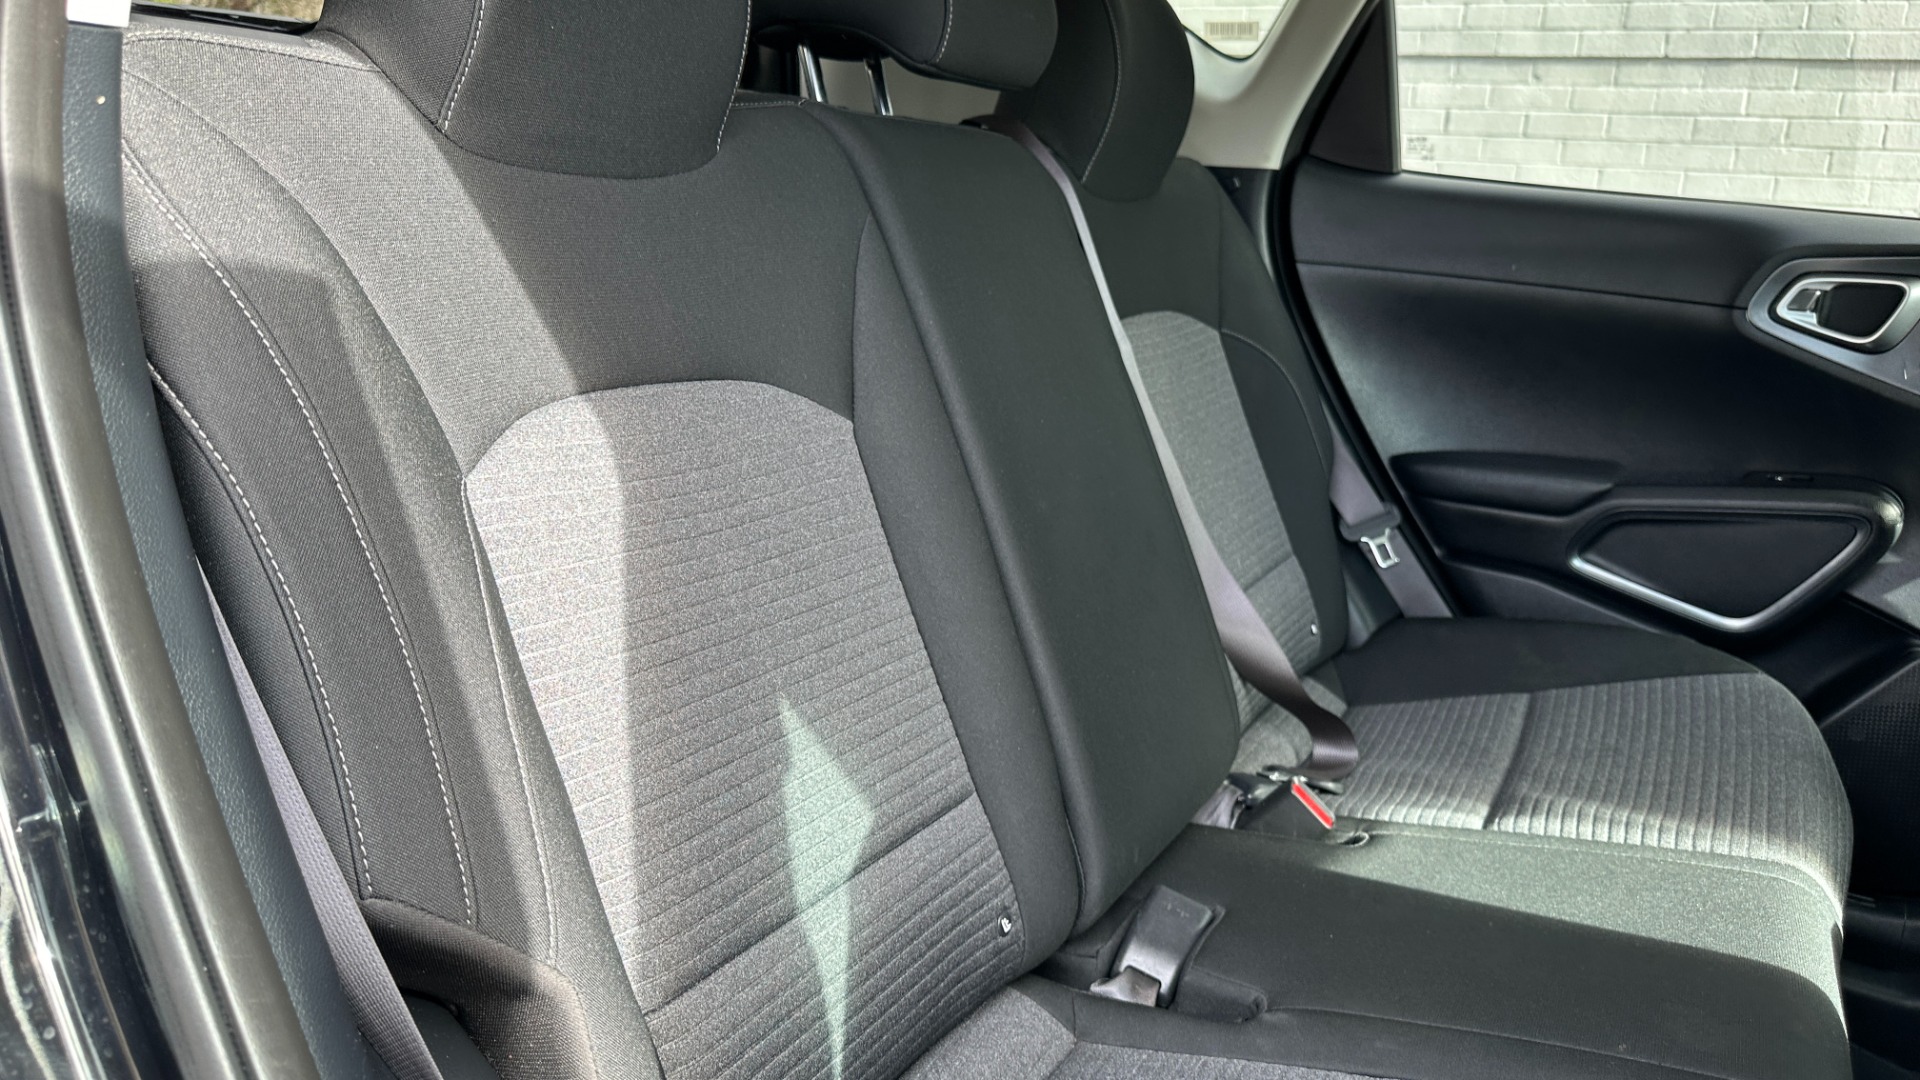 Used 2021 Kia Soul LX / RADIO DISPLAY / 4CYL ENGINE / CARPET FLOOR MATS for sale $17,995 at Formula Imports in Charlotte NC 28227 29